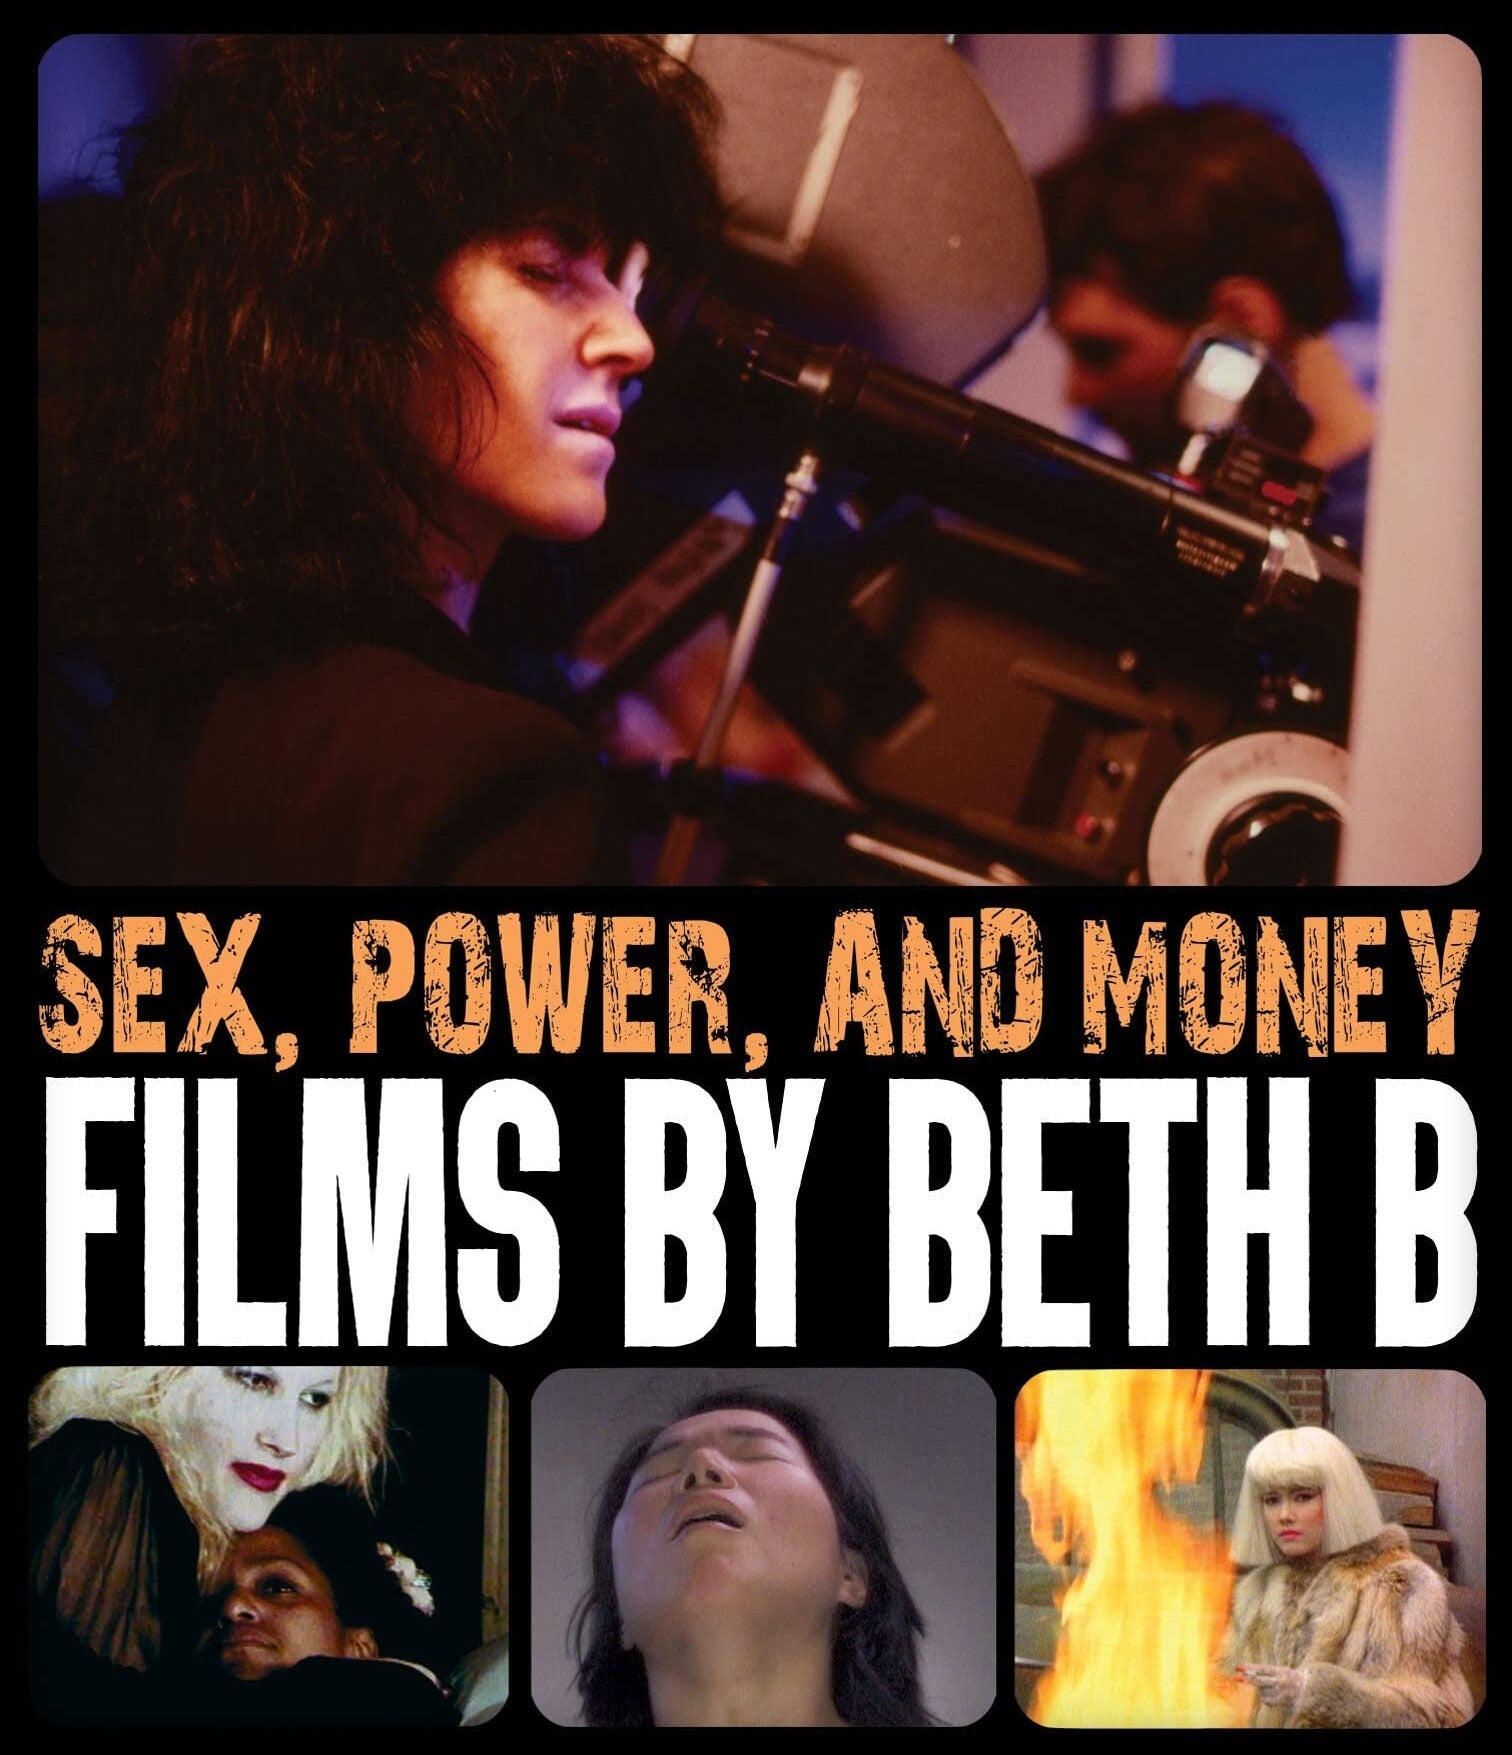 SEX, POWER AND MONEY: FILMS BY BETH B BLU-RAY